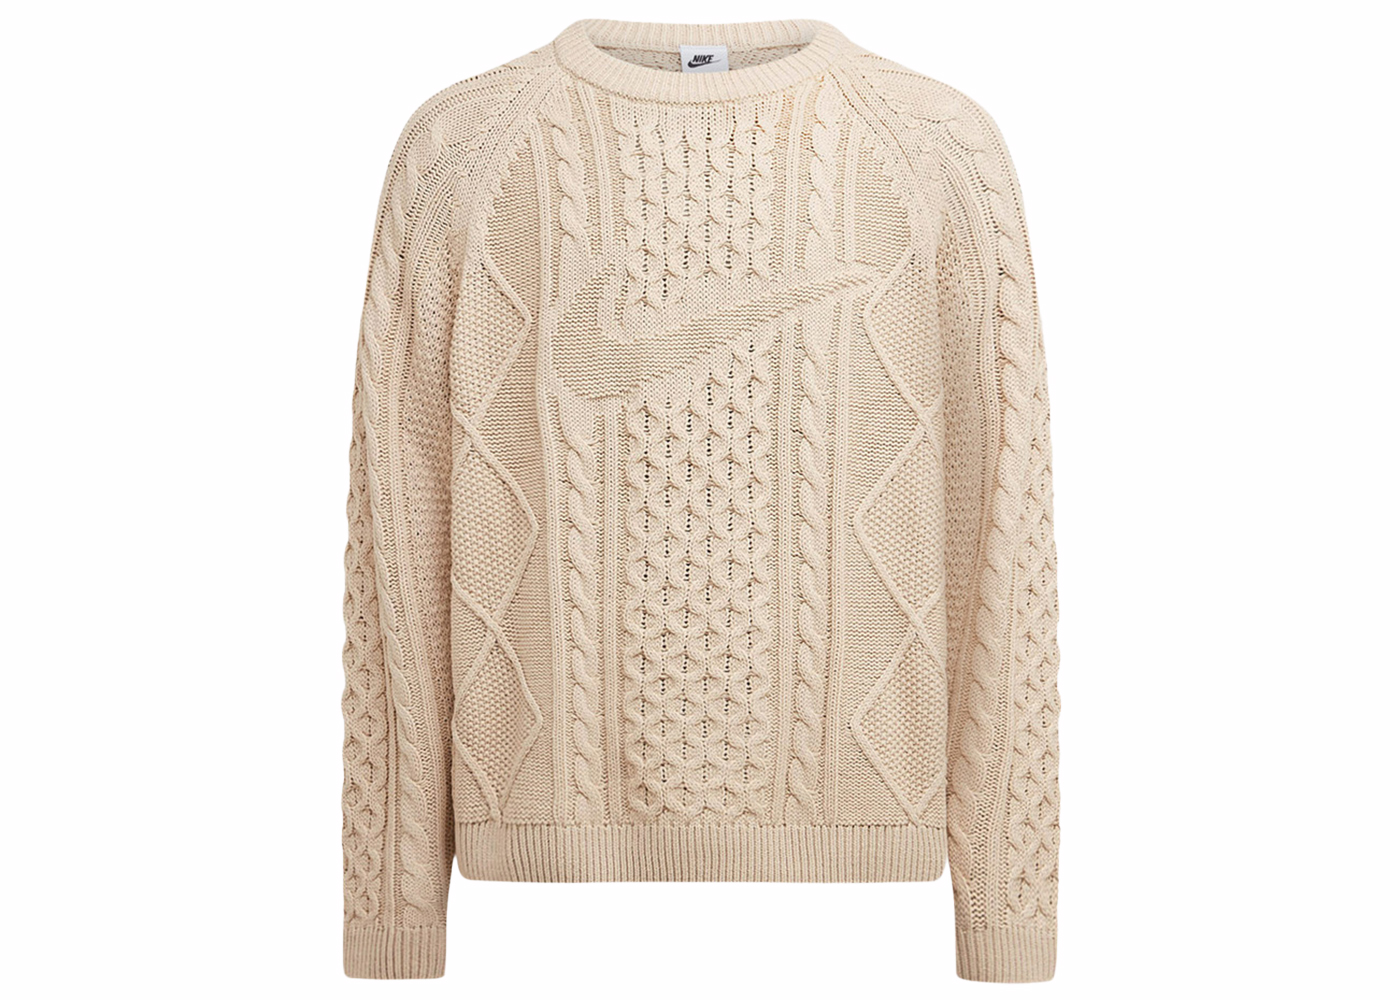 Nike Life Cable Knit Sweater (Asia Sizing) Rattan